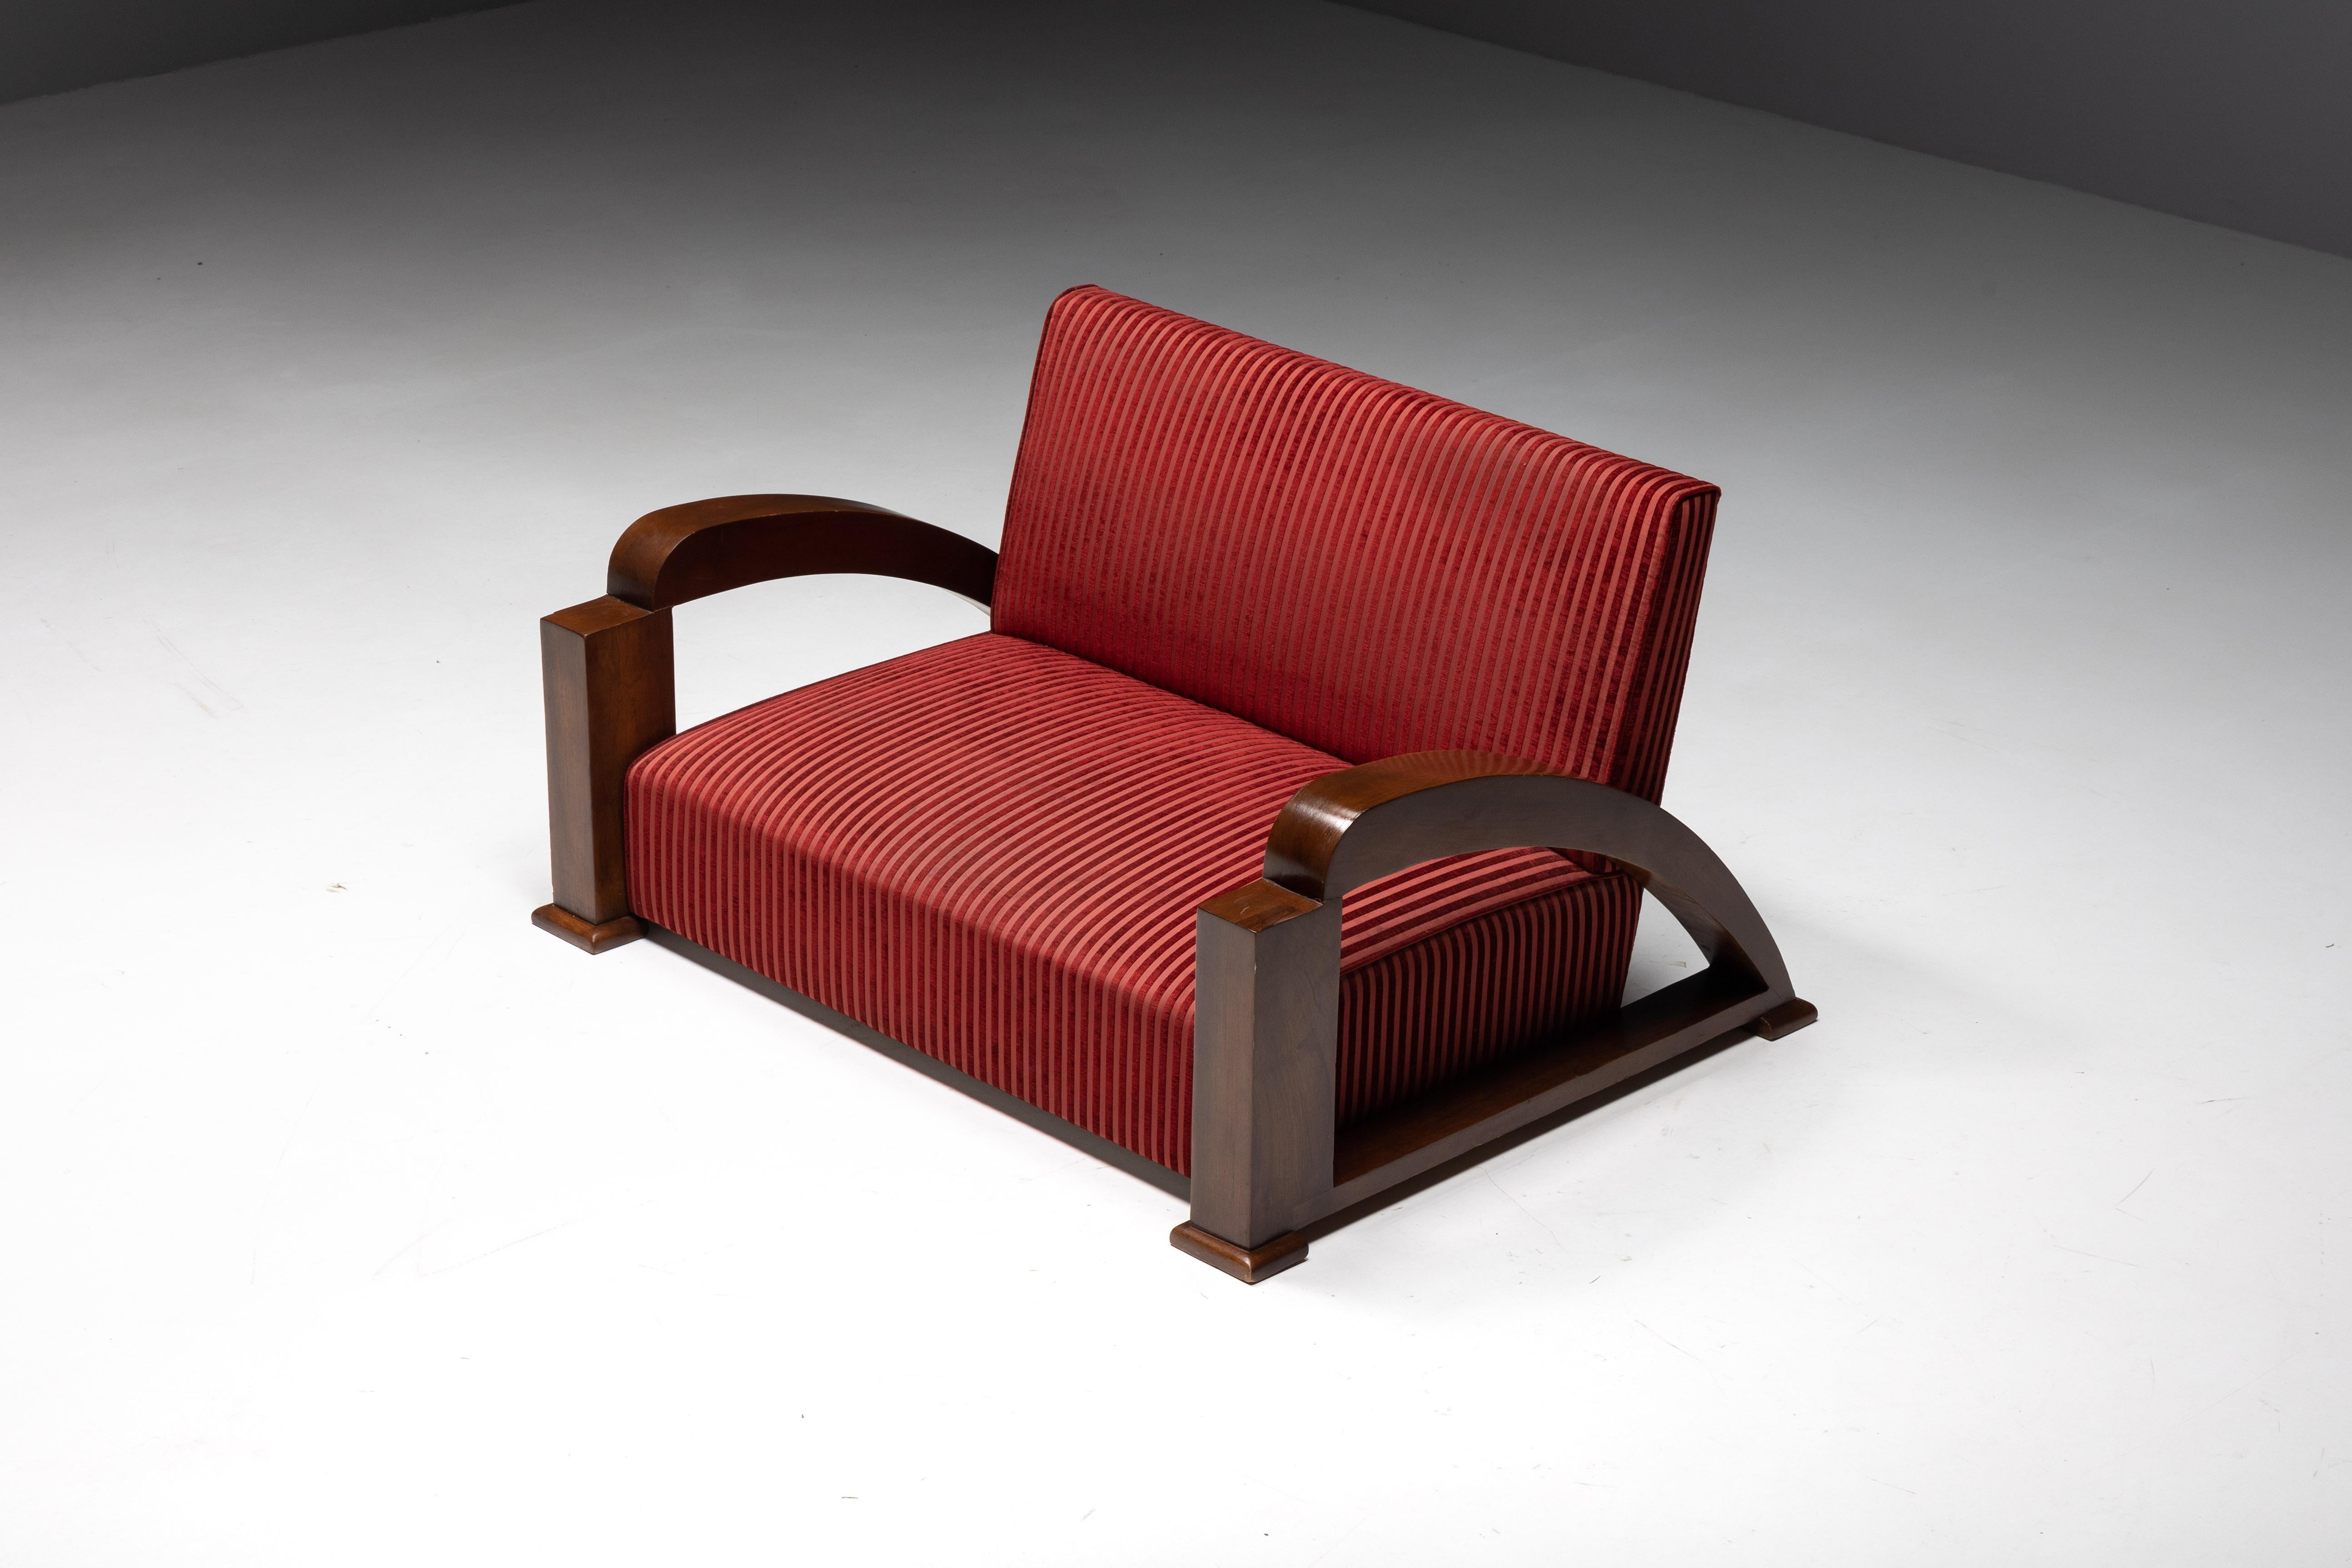 Art Deco Sofa in Red Striped Velvet and with Swoosh Armrests, France, 1940s For Sale 4